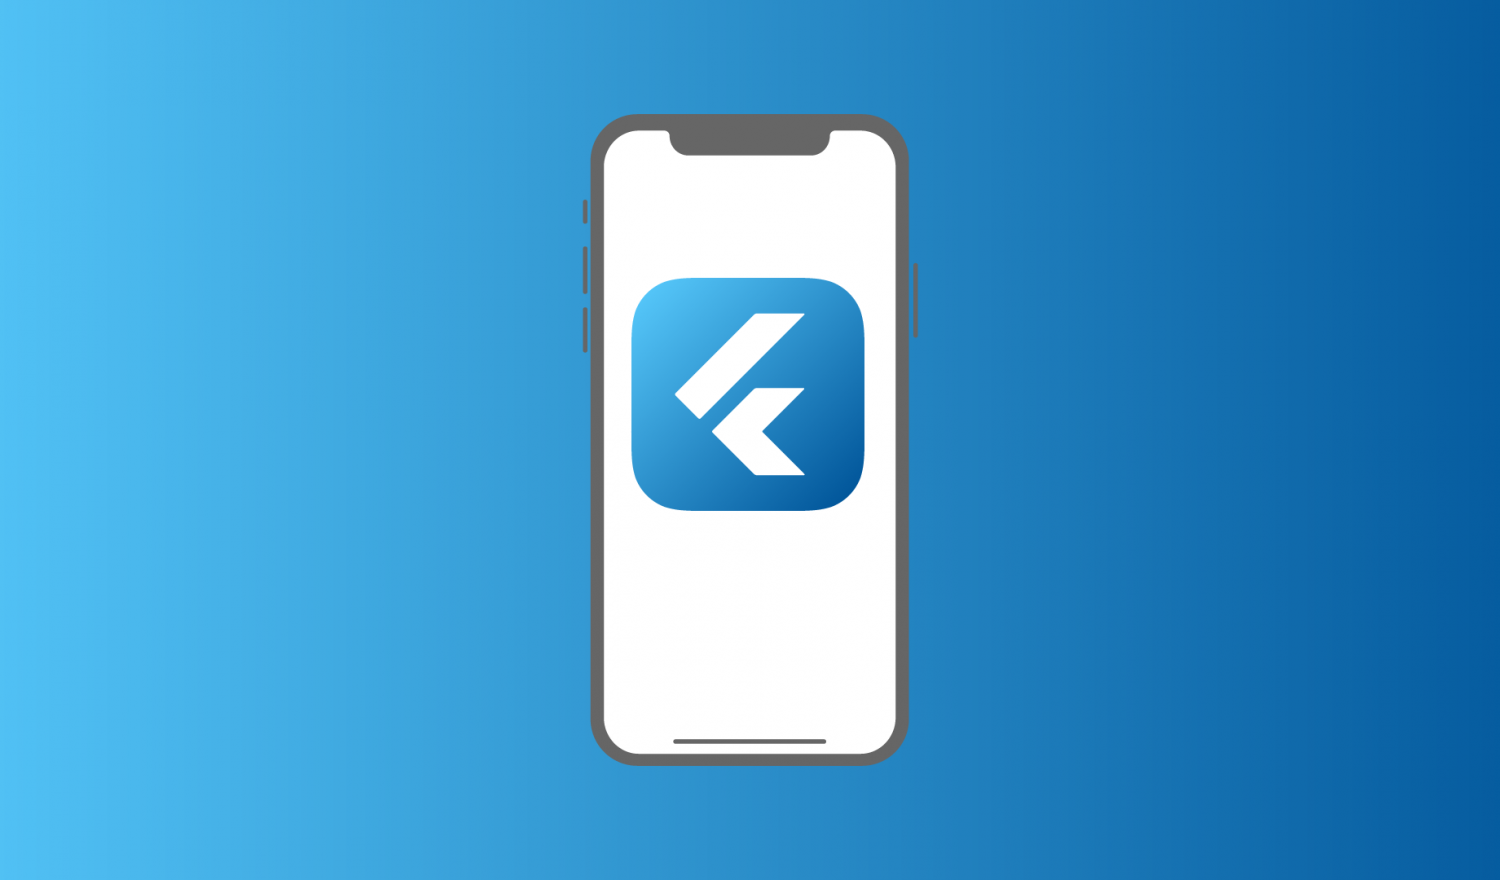 An iPhone X with a Flutter app icon